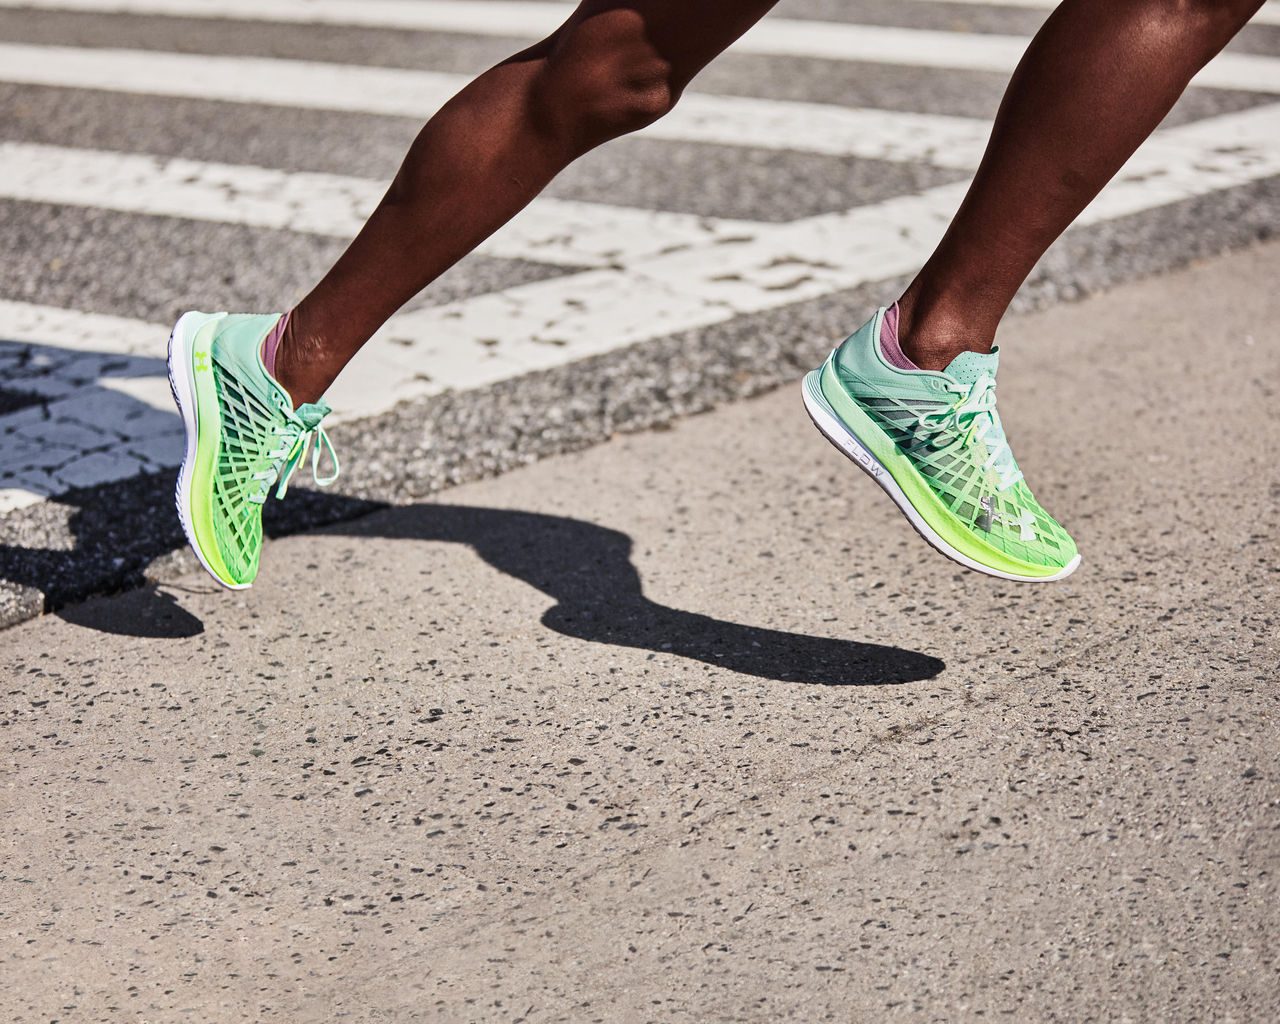 Fast Just Got Faster With New Run Footwear Innovation From Under Armour